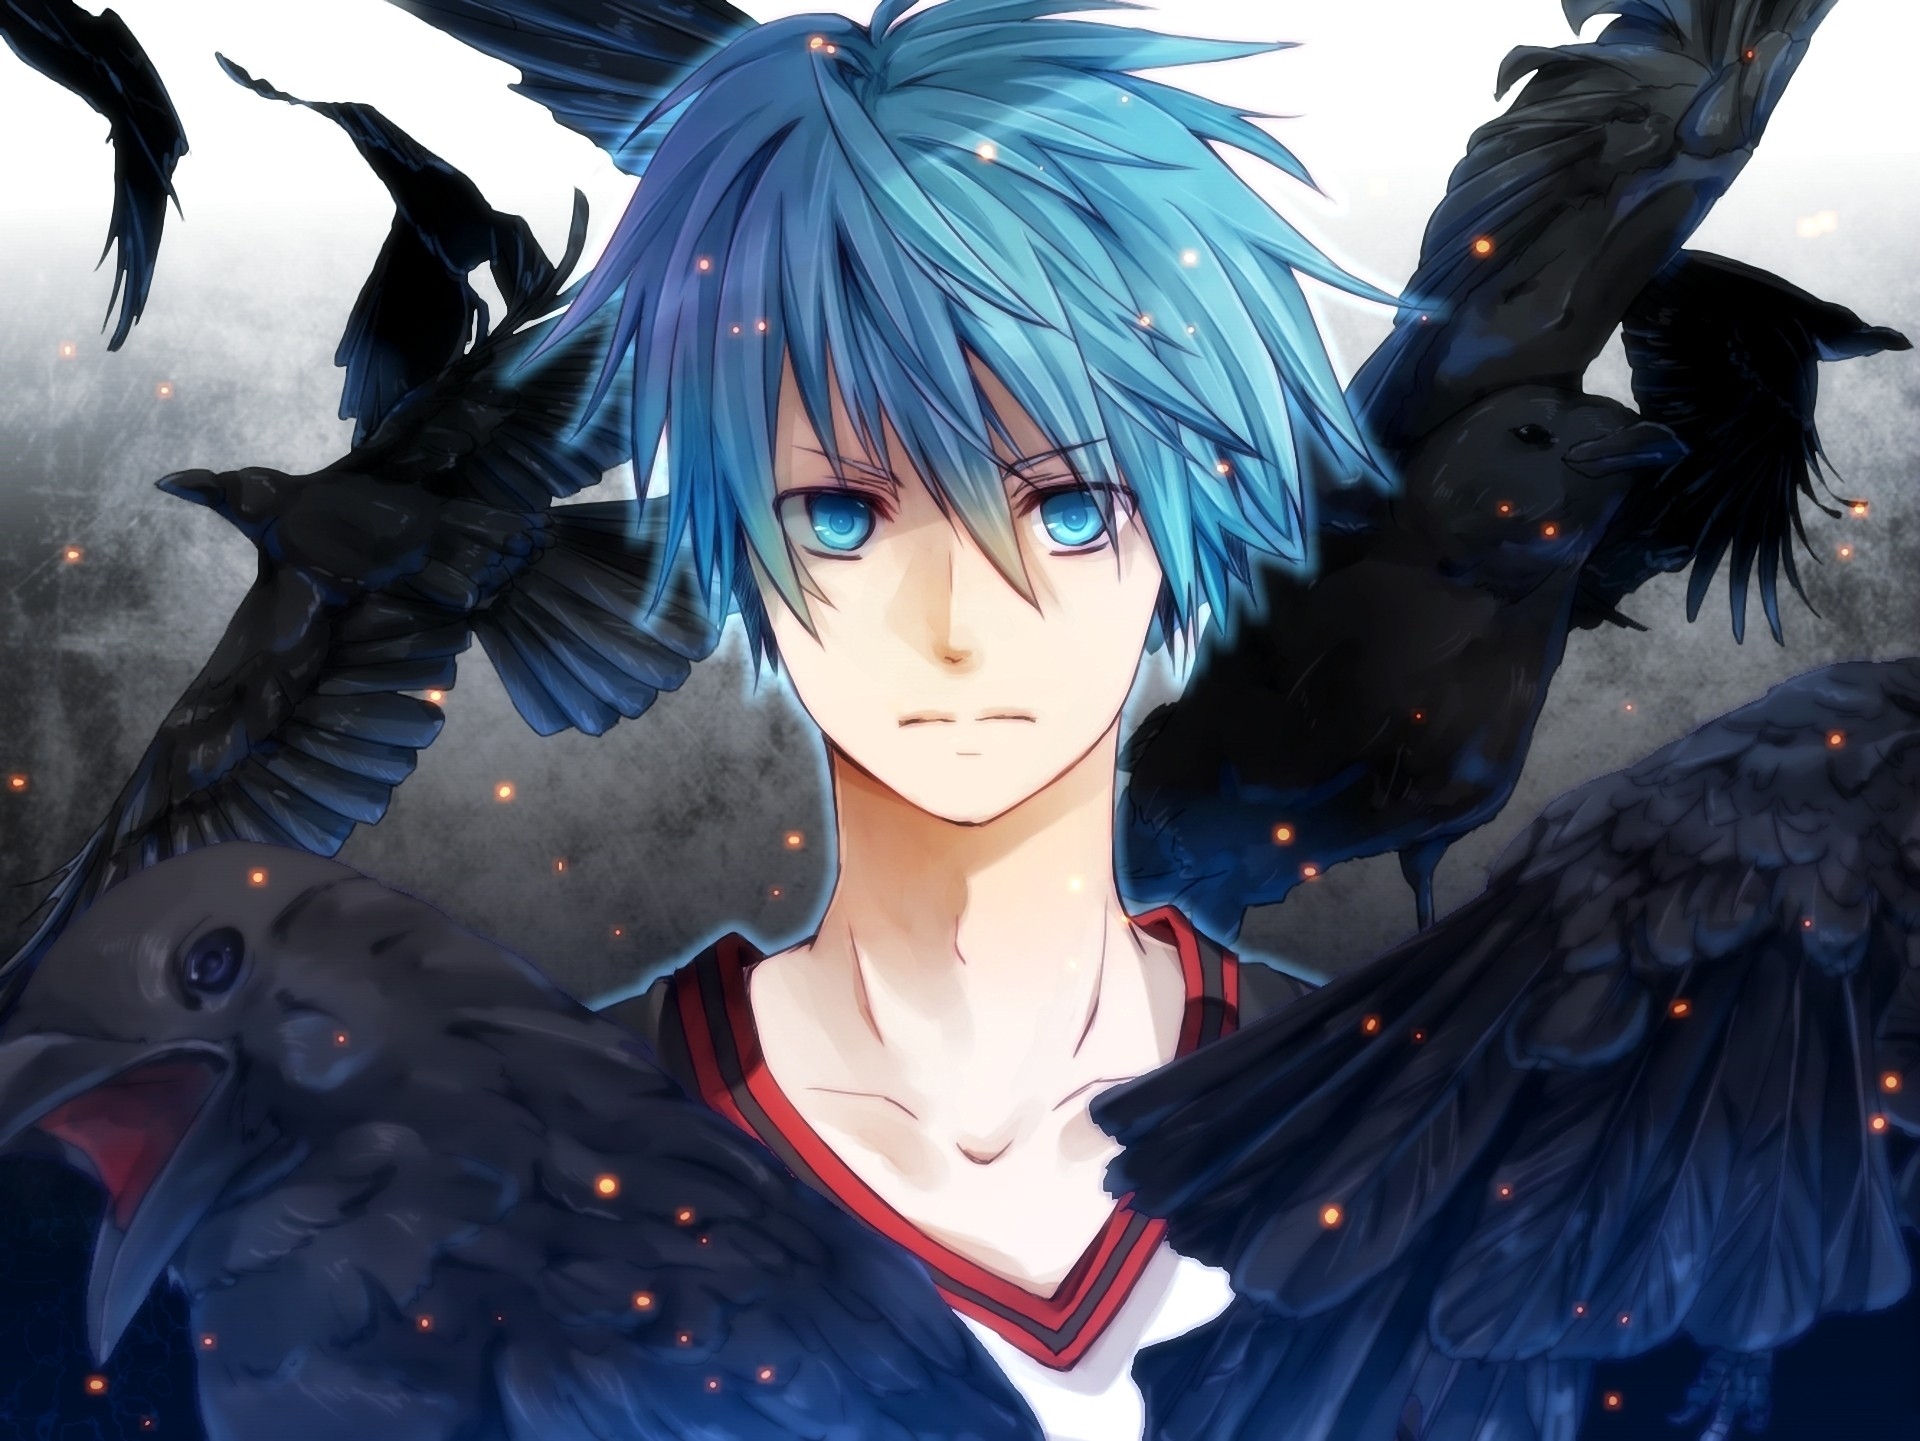 Anime Boys With Blue Hair And Blue Eyes - 1920x1441 Wallpaper 